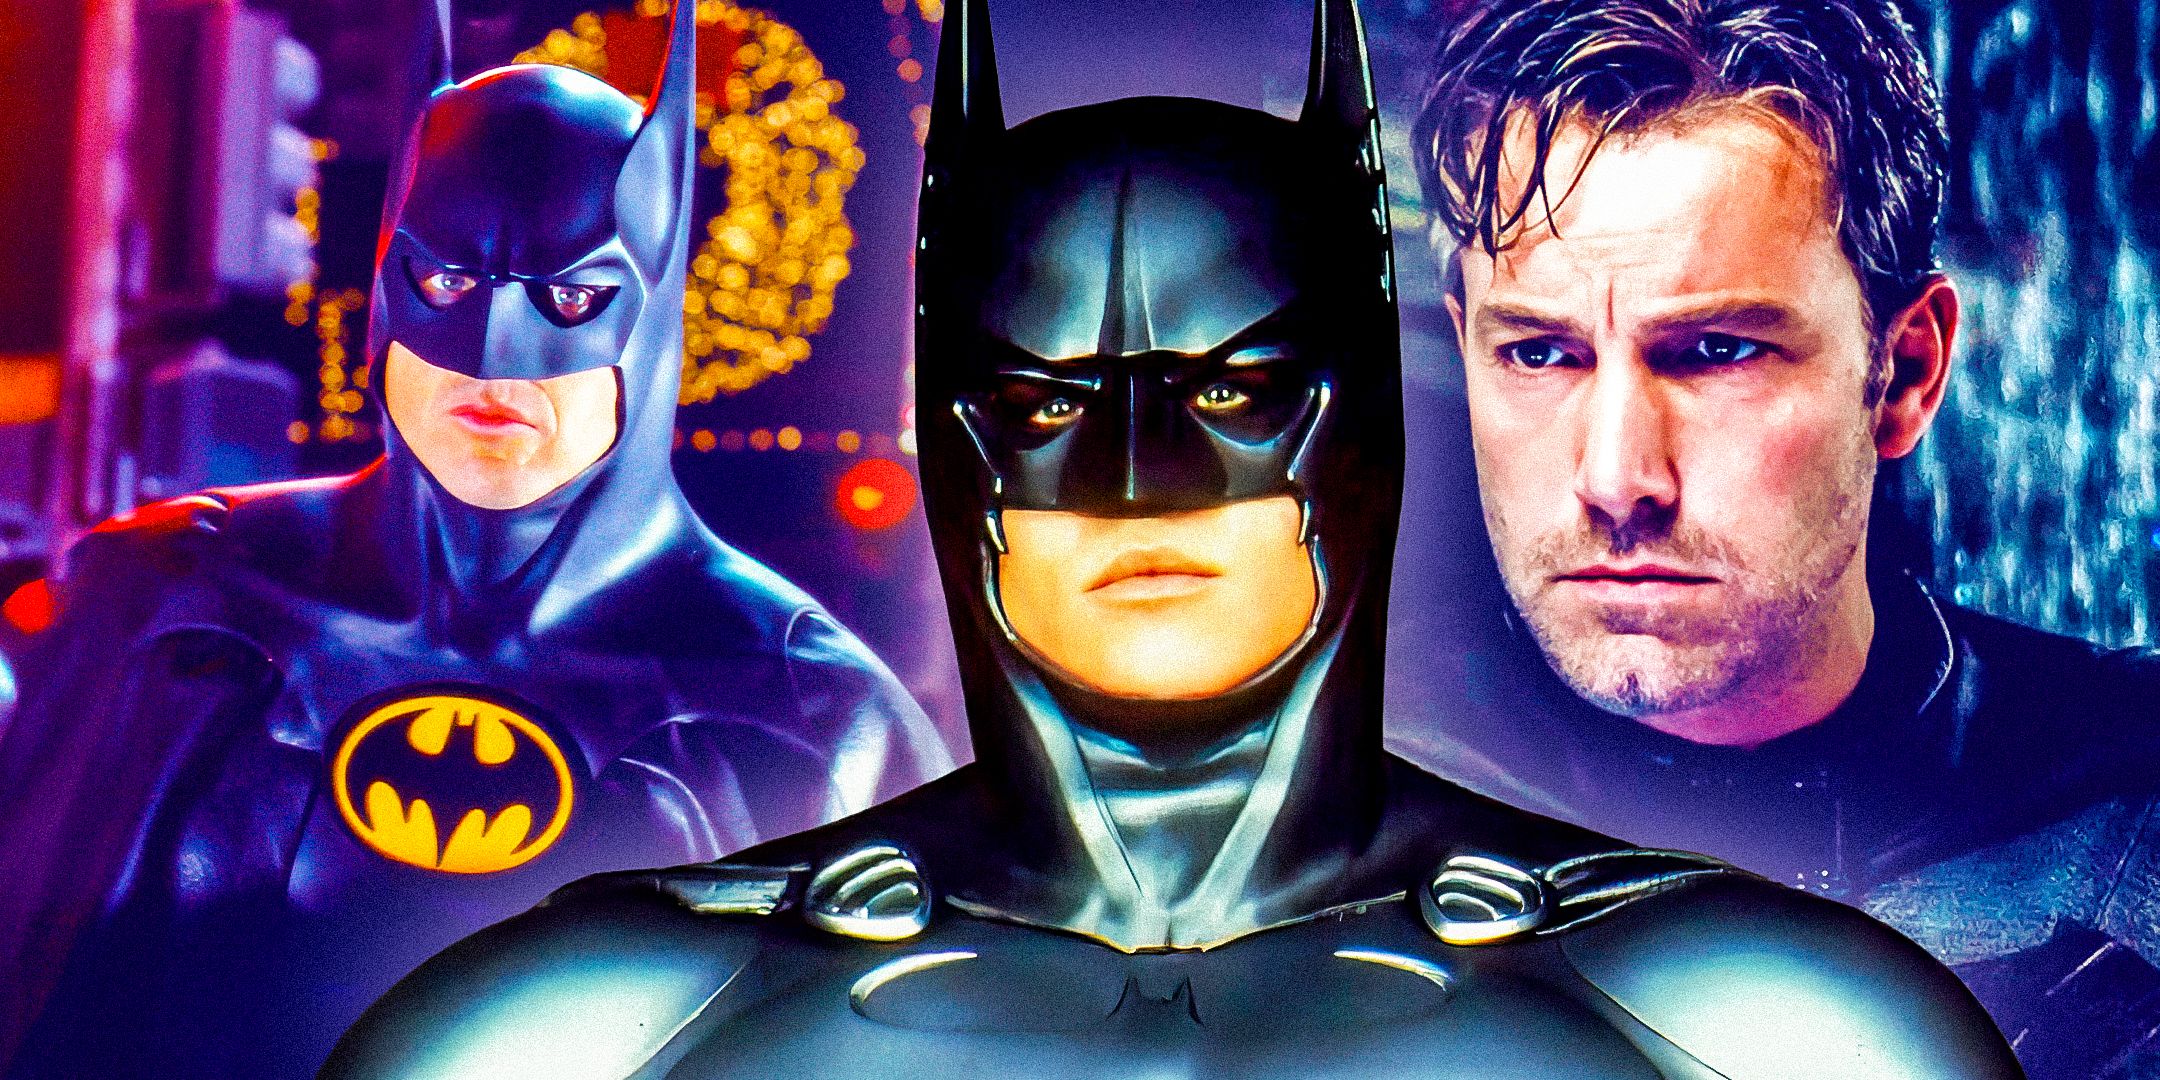 Batman 1989 Michael Keaton as in full Batman costume next to Val Kilmer in Batman Forever and Ben Affleck in Batman v Superman without the cawl